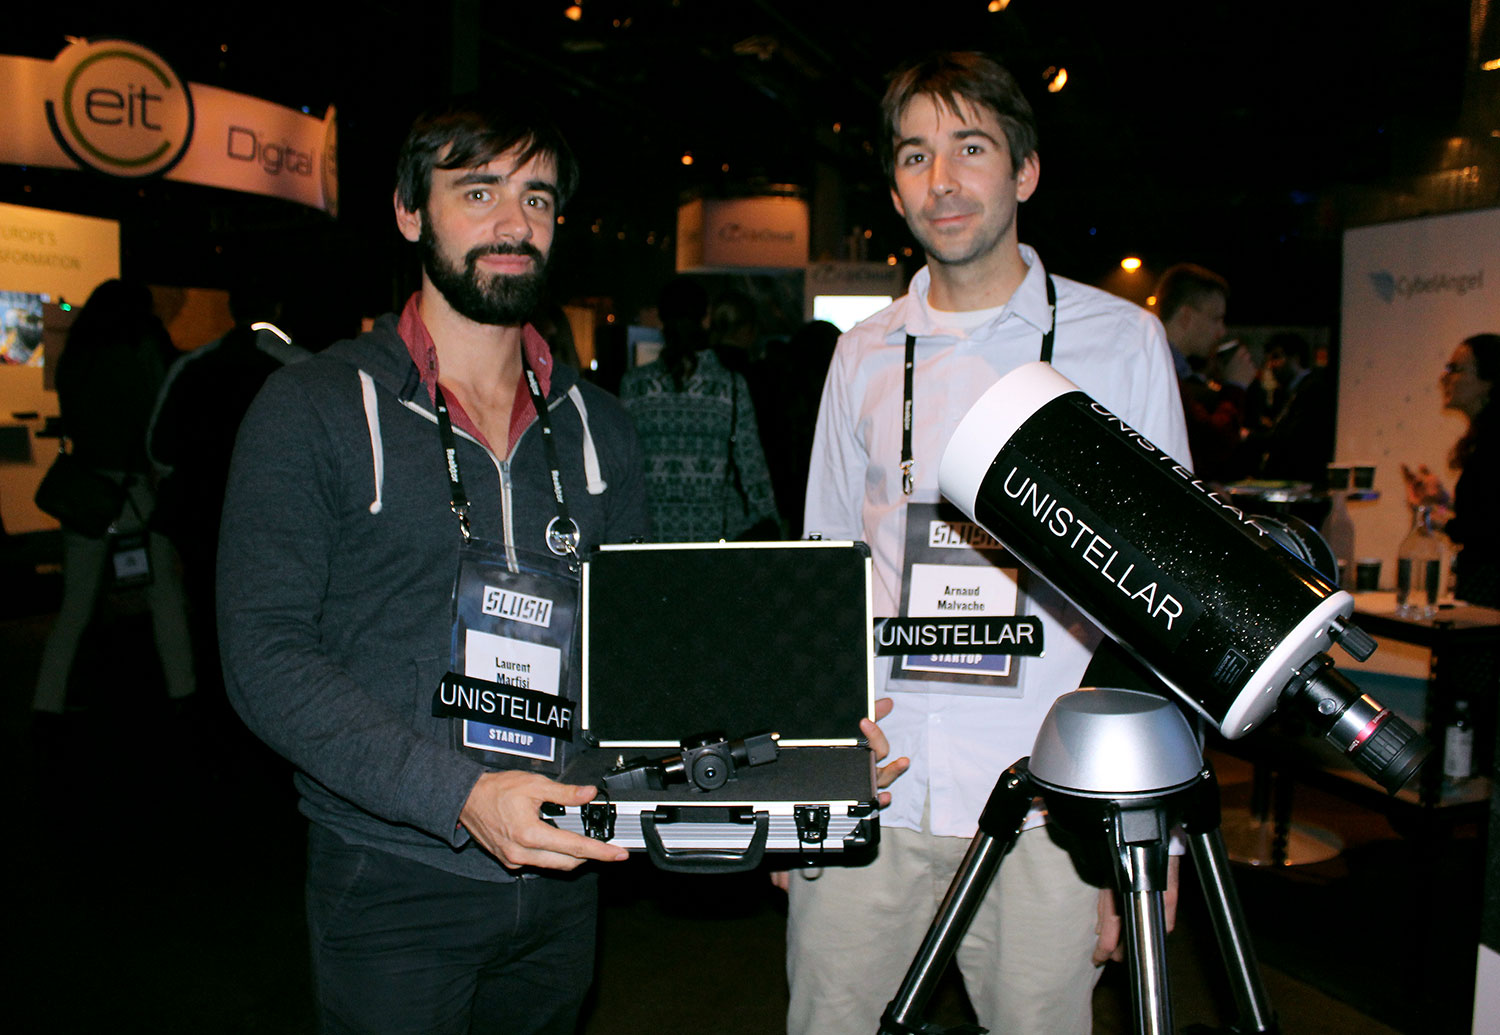 Unistellar This telescope helps amateur astronomers spot asteroids to keep Earth safe IBTimes UK